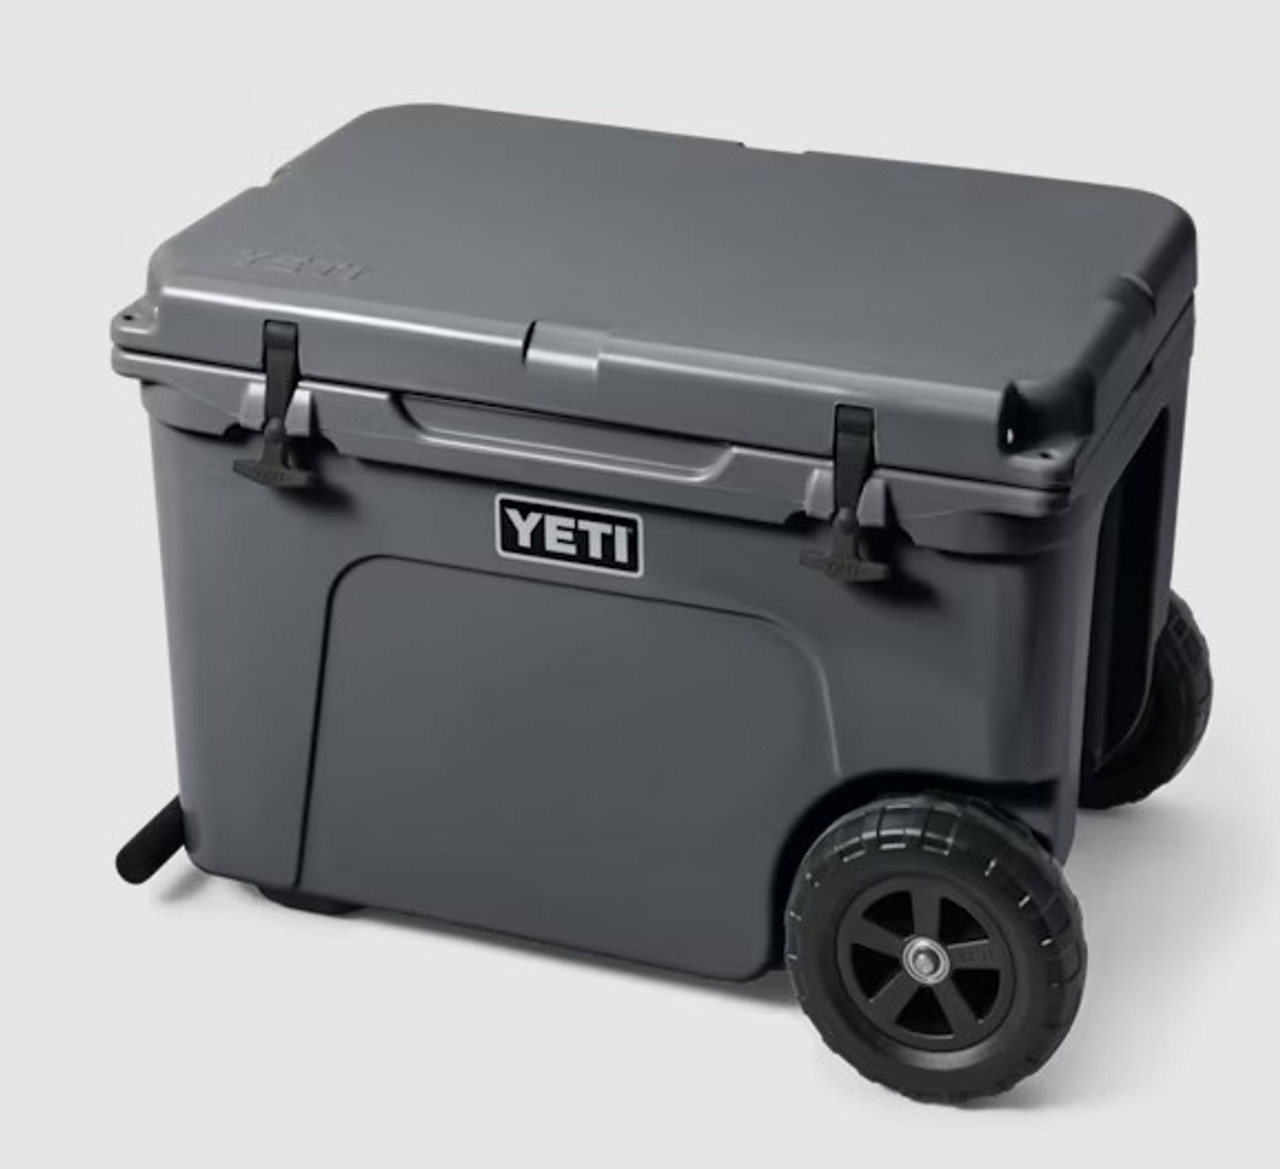 https://cdn11.bigcommerce.com/s-s7ib93jl4n/images/stencil/1280x1280/products/58893/93244/Haul-Wheeled-Cooler-Charcoal-4__28744.1687970132.jpg?c=2?imbypass=on